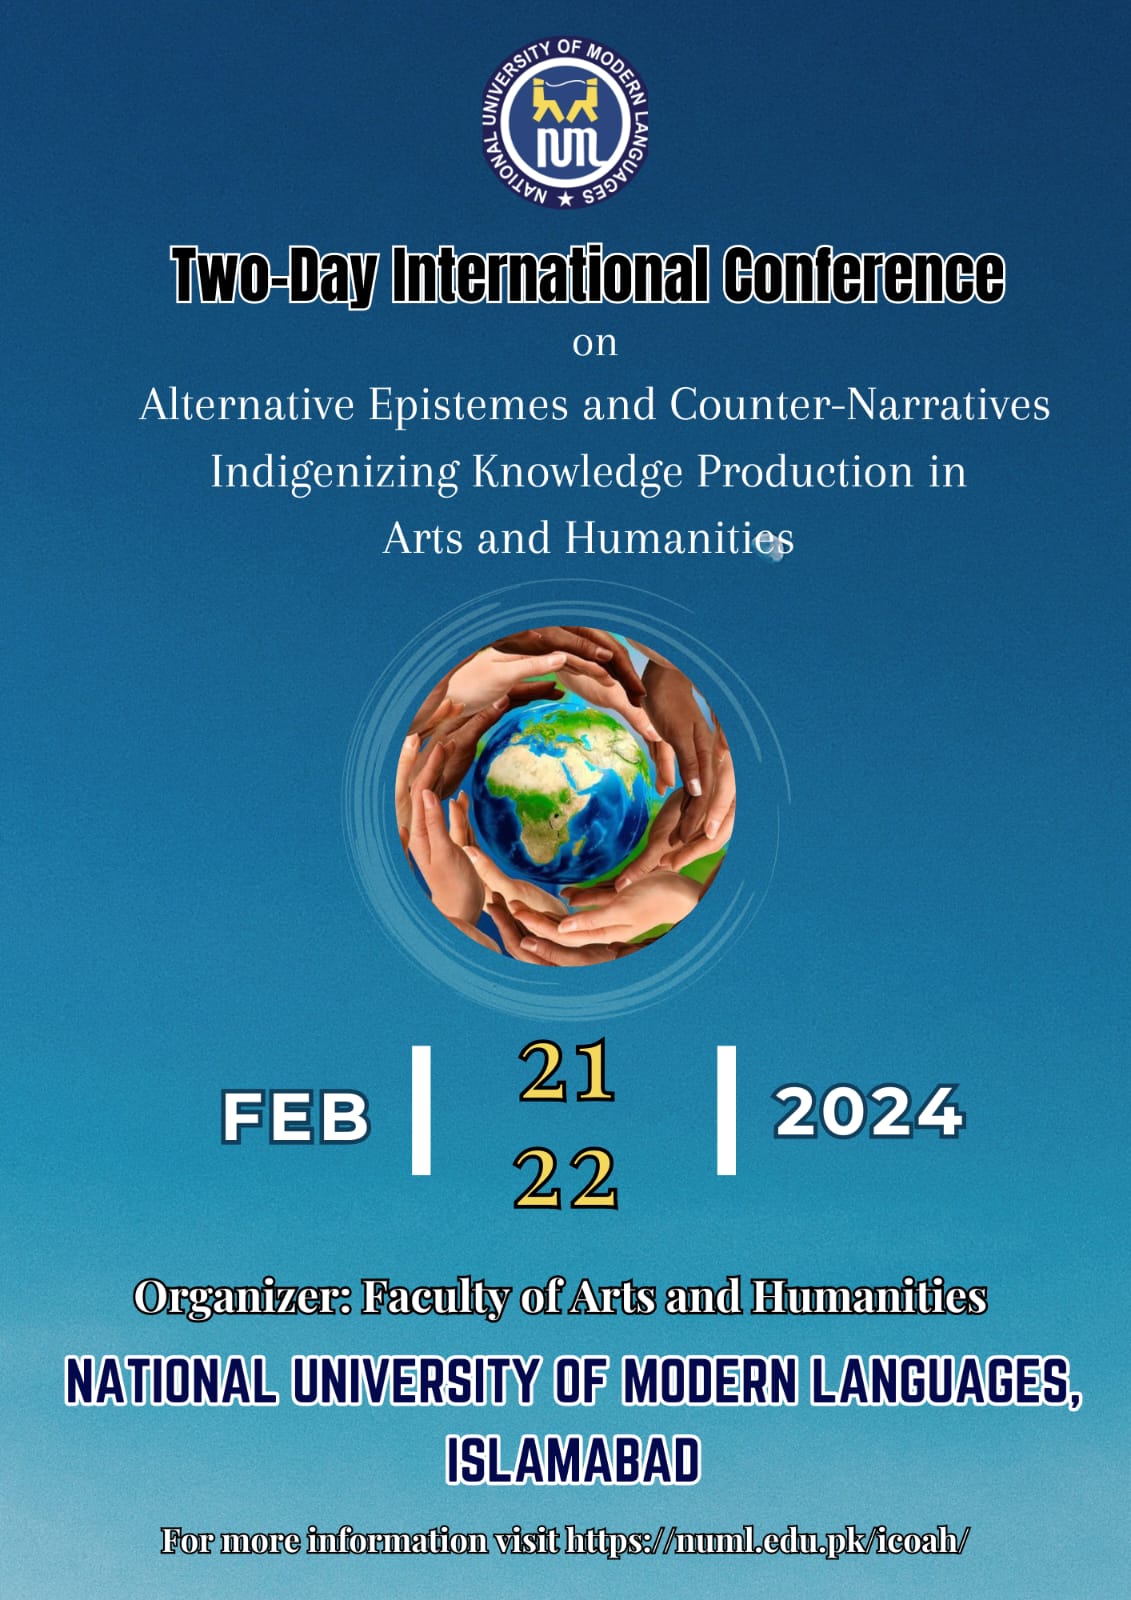 Two-Day International Conference on "Alternative Epistemes & Counter-Narratives: Indigenizing Knowledge Production in Arts & Humanities